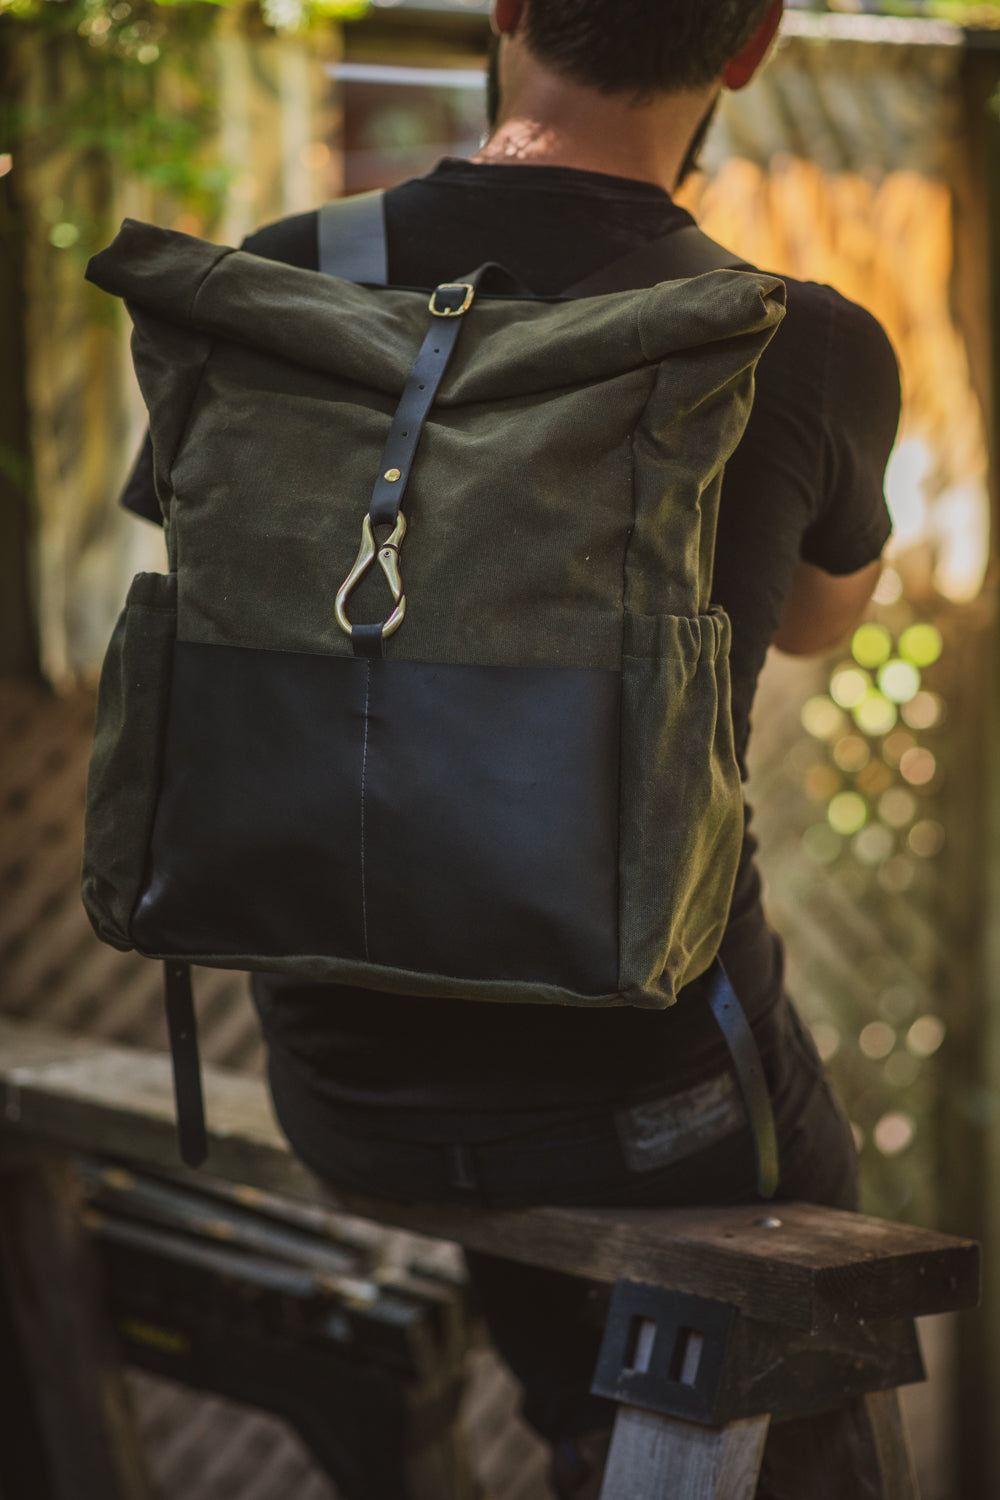 Veinage De Lorimier black leather and army green waxed canvas roll top backpack, handmade in Montreal Canada